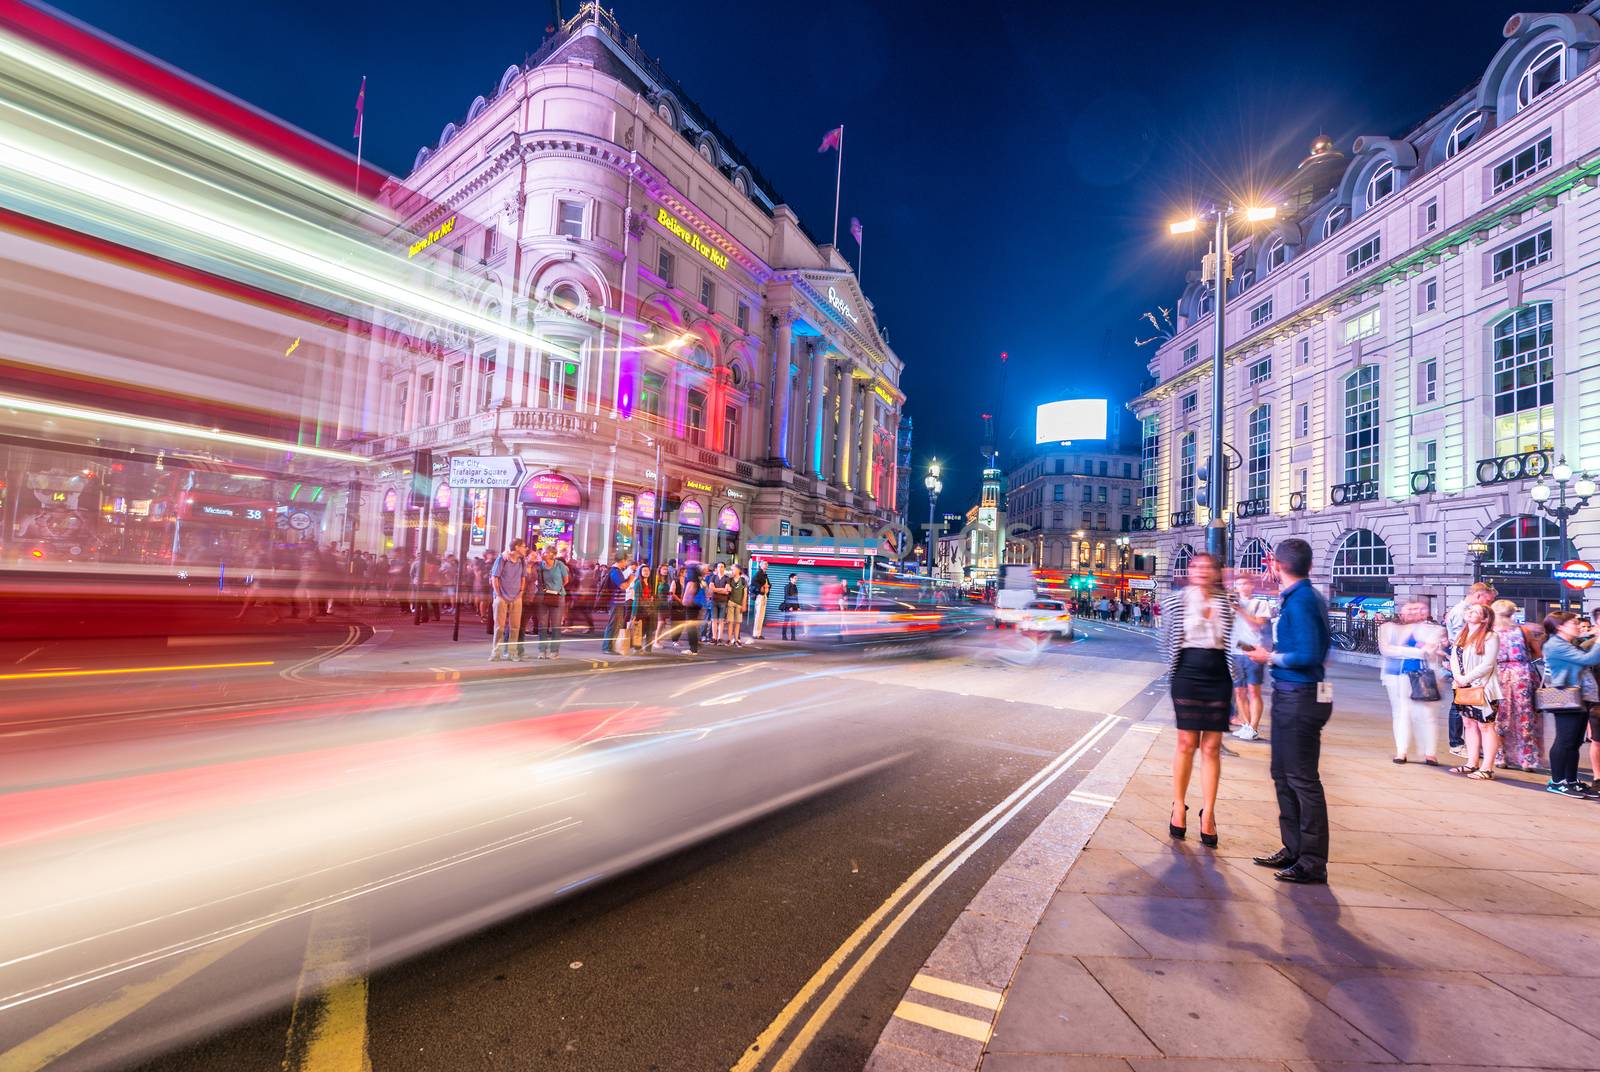 LONDON - JUNE 16, 2015: Traffic in Piccadilly Circus area. Picca by jovannig